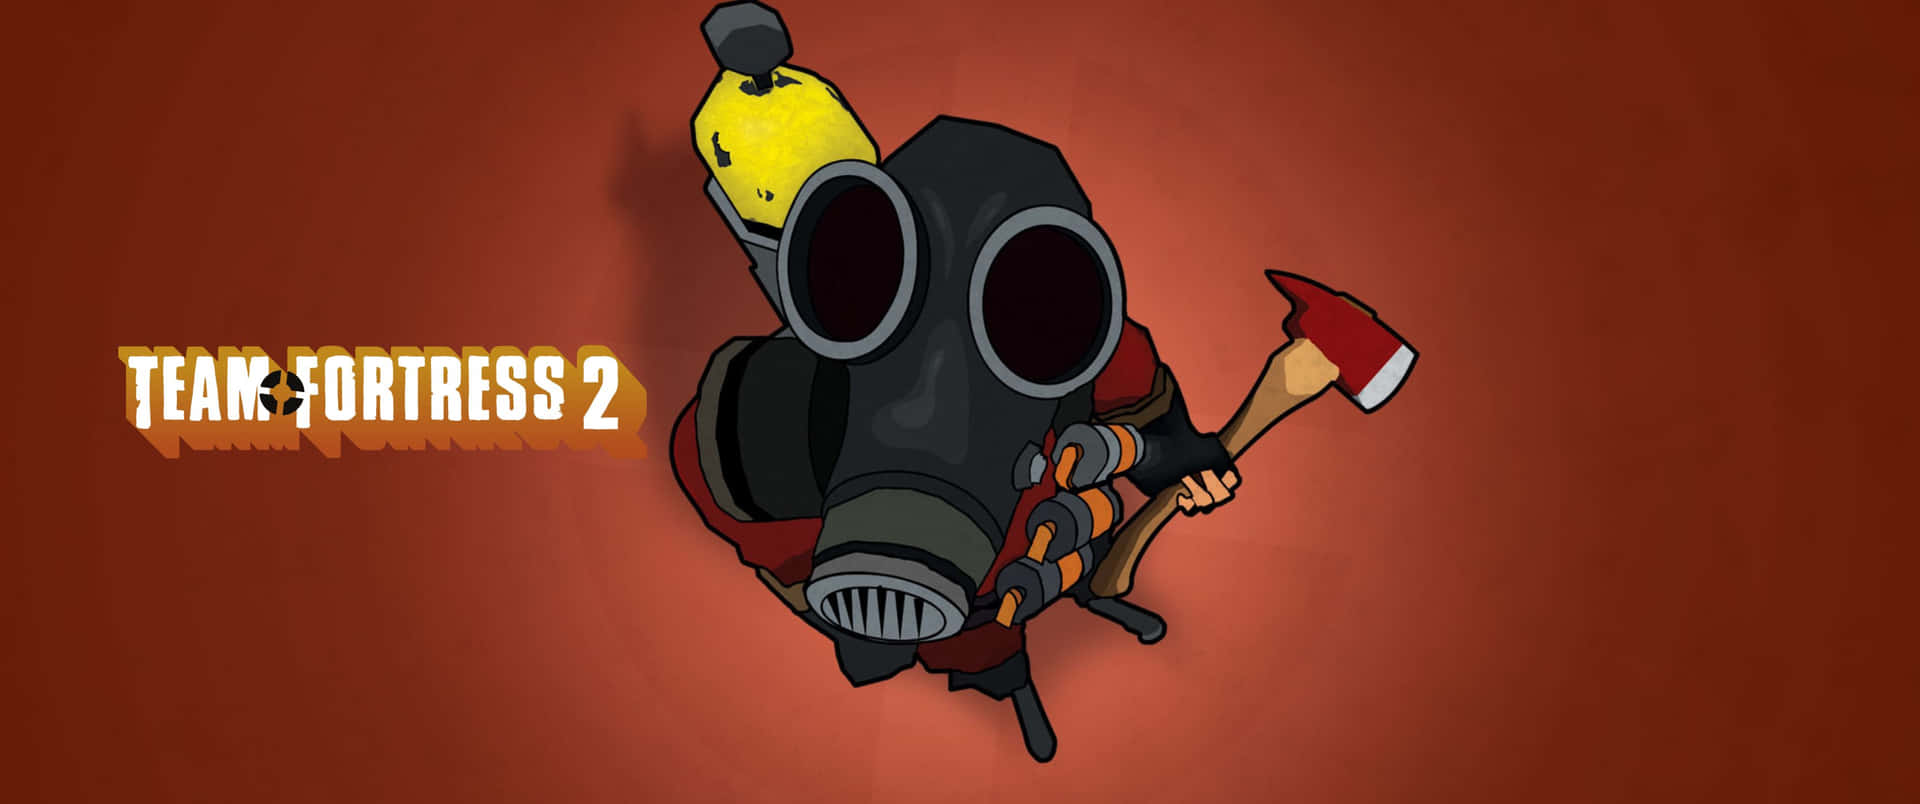 A Cartoon Character With A Gas Mask And A Hammer